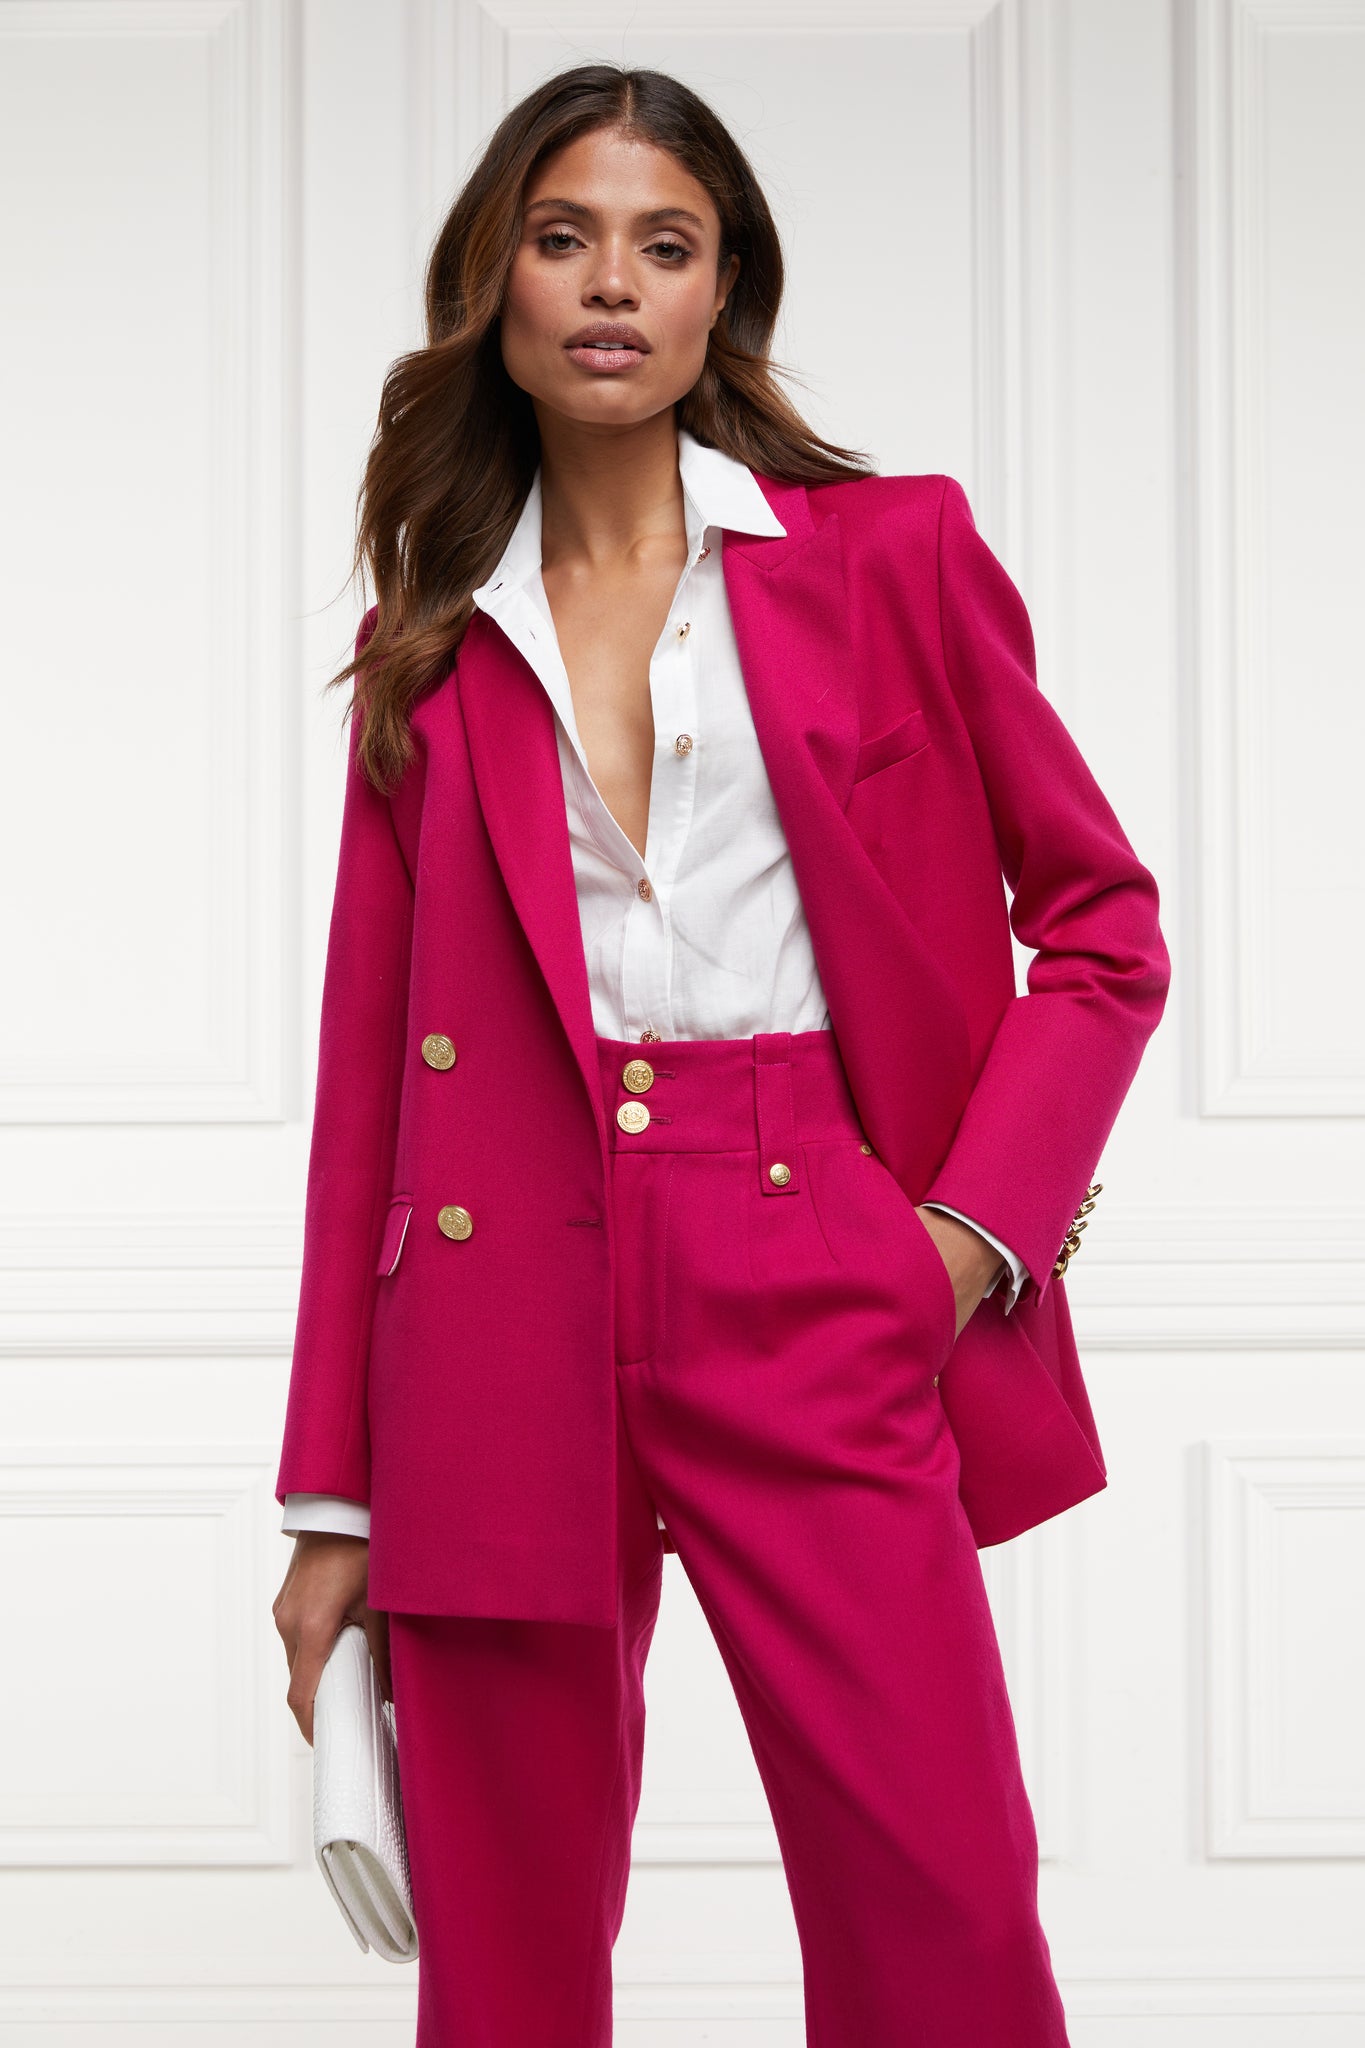 longline double breasted wool blazer in hot pink tailor made in britain with relaxed fit welt pockets and gold buttons on the front and cuffs